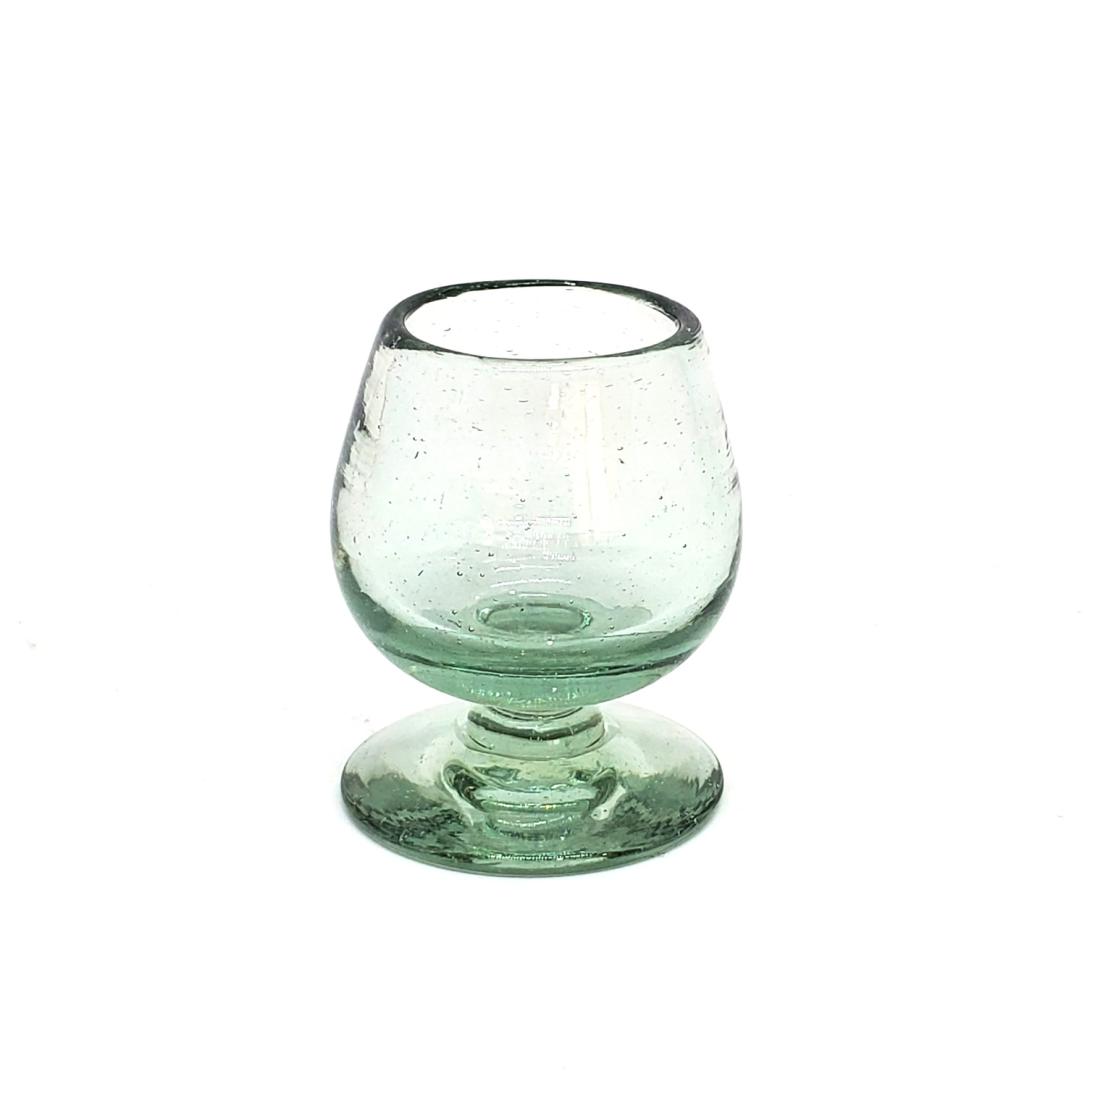 Sale Items / Clear 2.5 oz Tequila Sippers  (set of 6) / Sip your favourite tequila or mezcal with these iconic clear handcrafted sipping glasses. You may also serve lemon juice or other chasers.